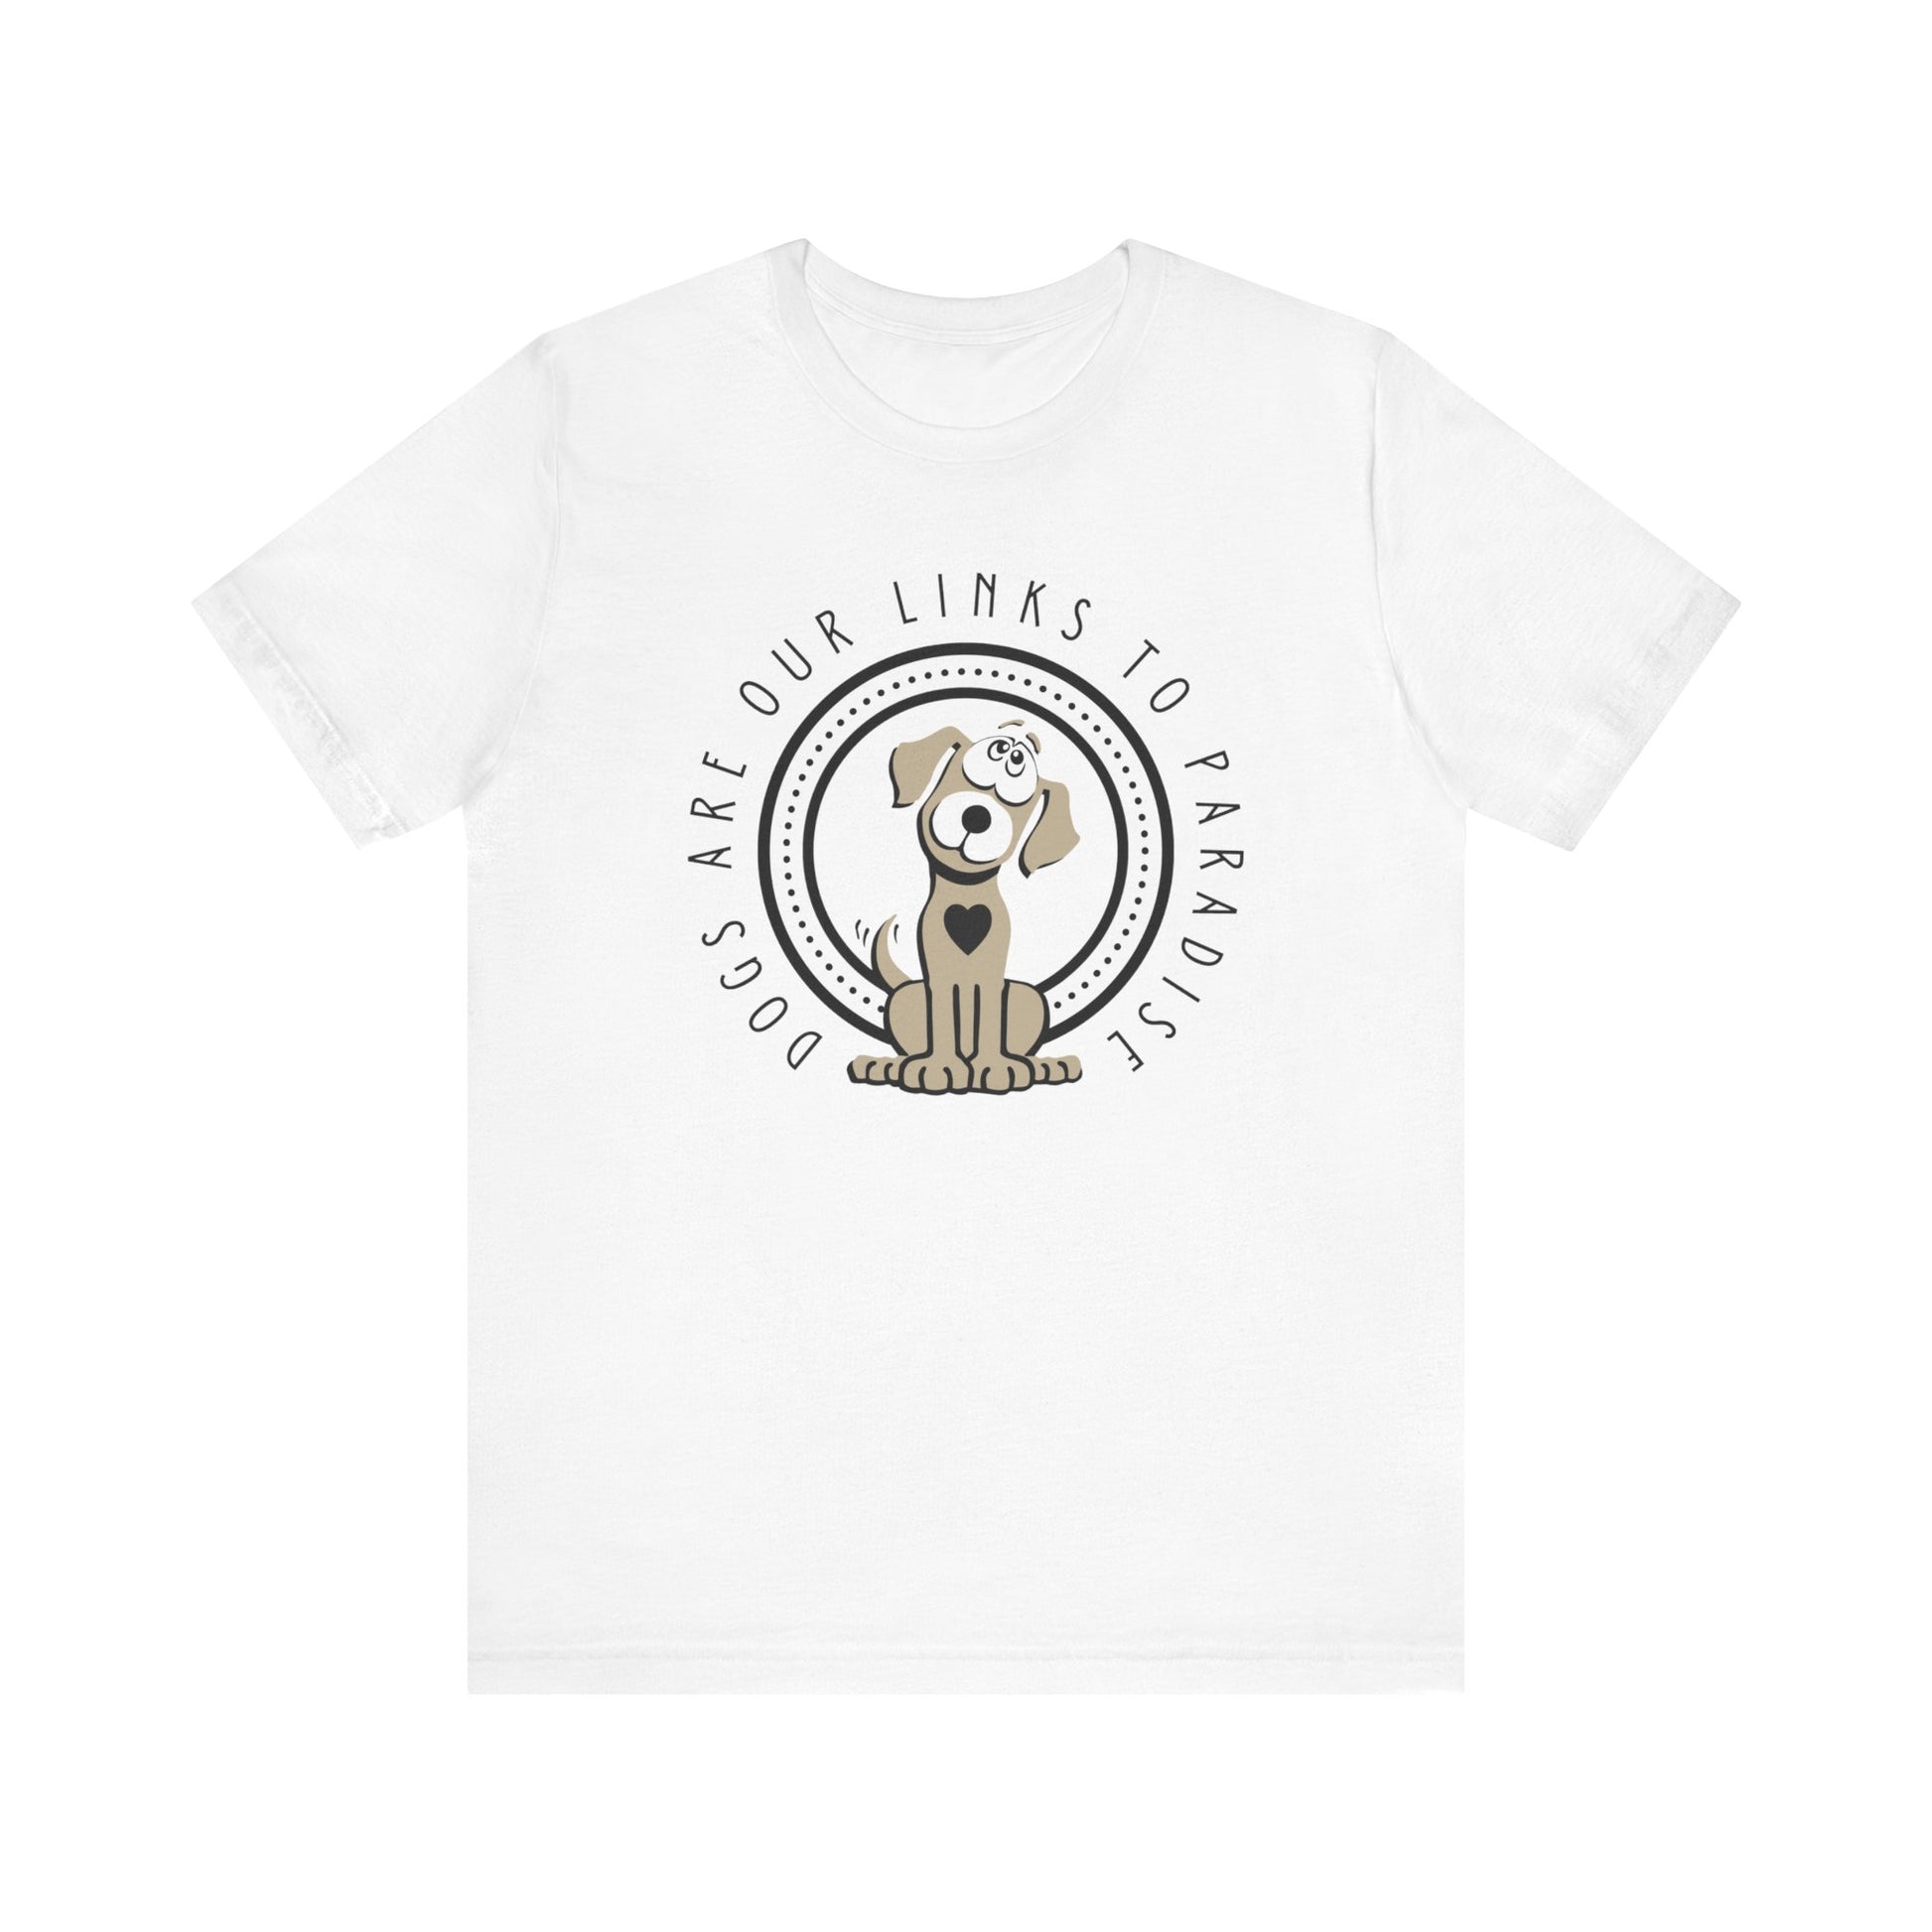 Against a white backdrop, a white unisex Dogs Pure Love tee features a graphic and slogan; 'Dogs Are Our Links to Paradise.'